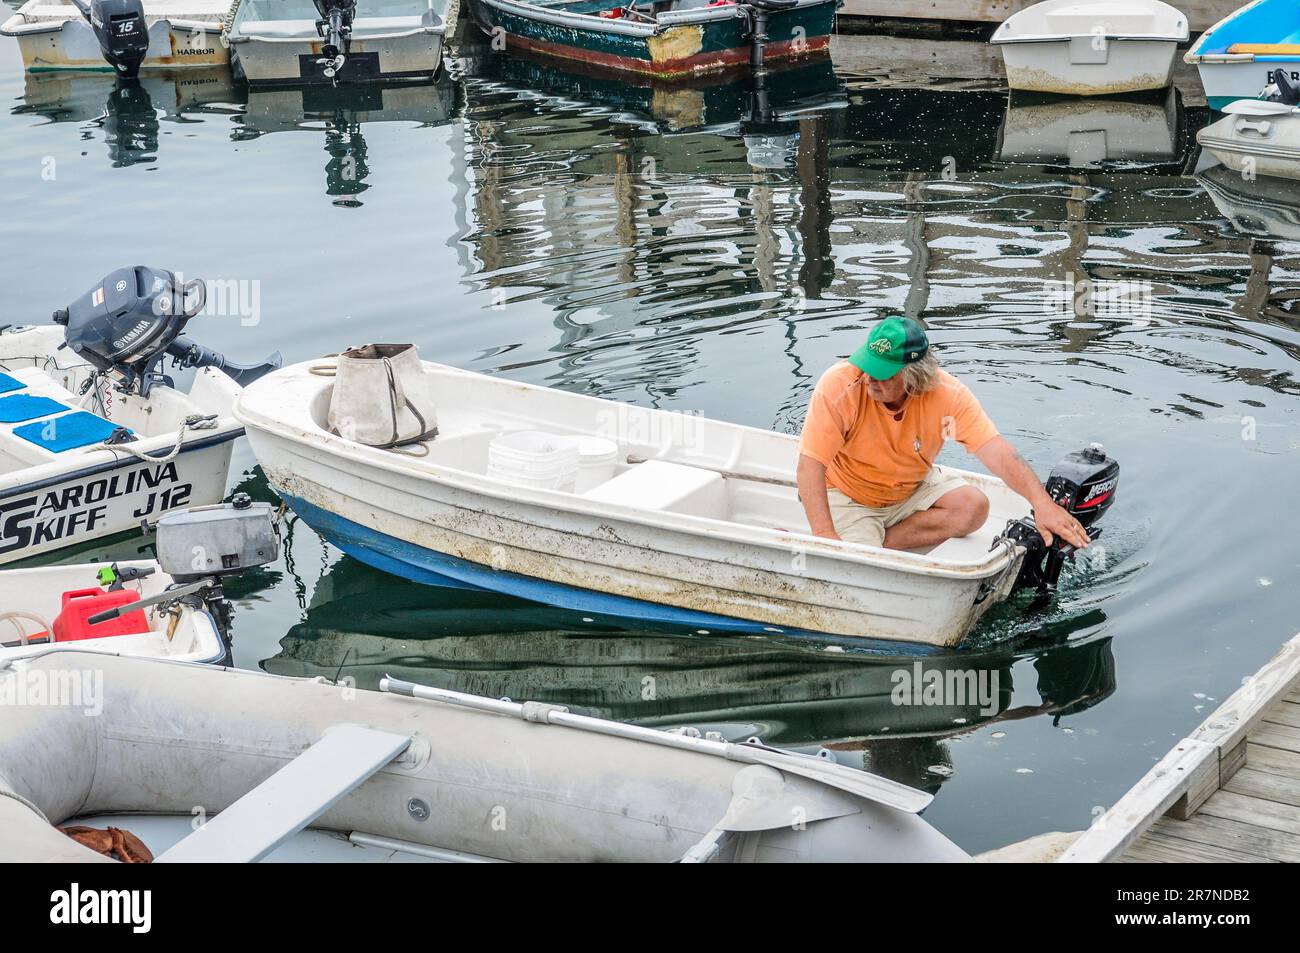 Man with his new outboard motor,is not sure about how it works. So he made big turn, only to hit a boat tied to the wharf.  Bad start to the day. Stock Photo